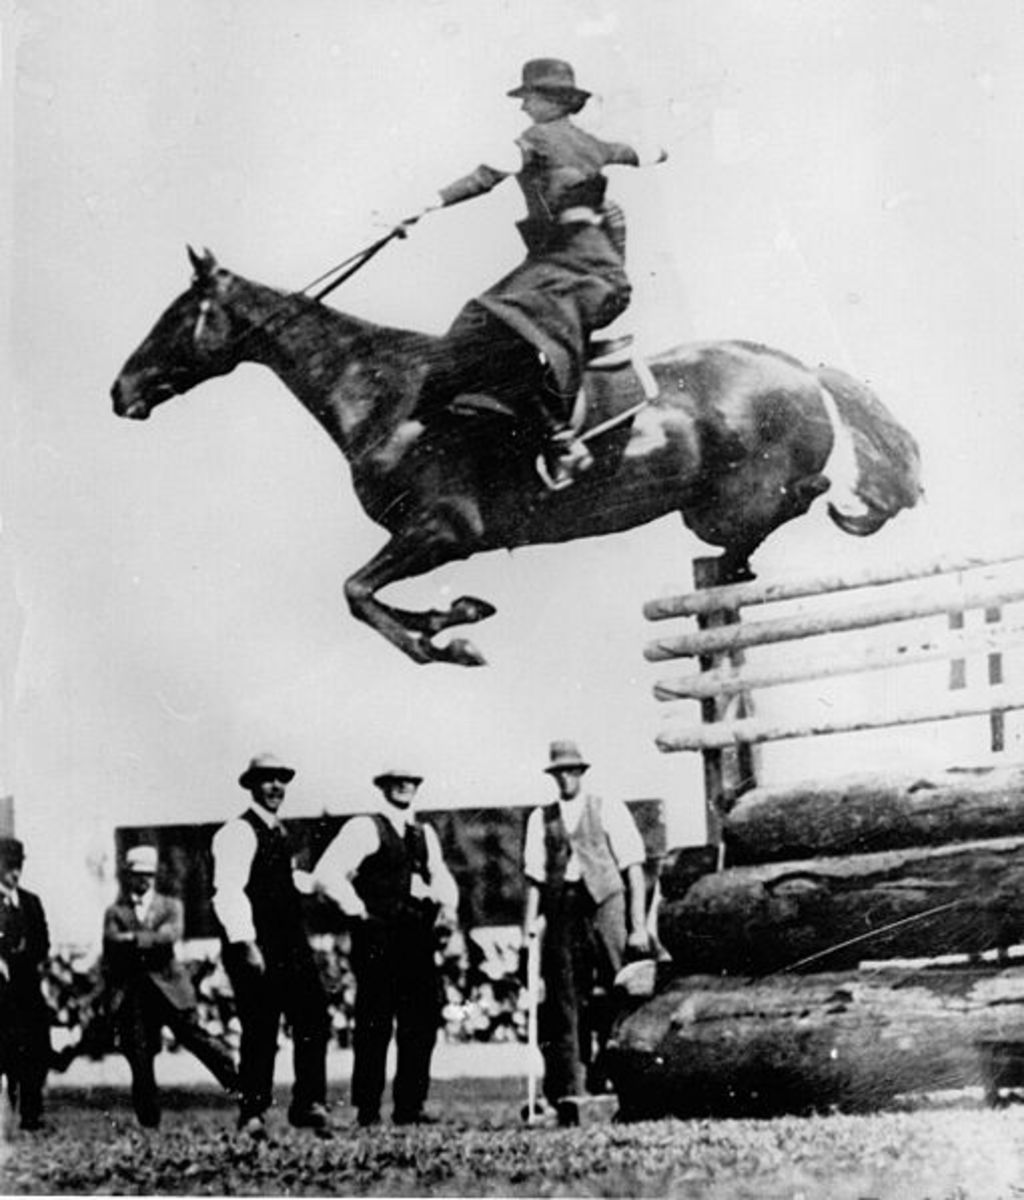 A woman performing a 6'6" high jump over an obstacle while riding sidesaddle.